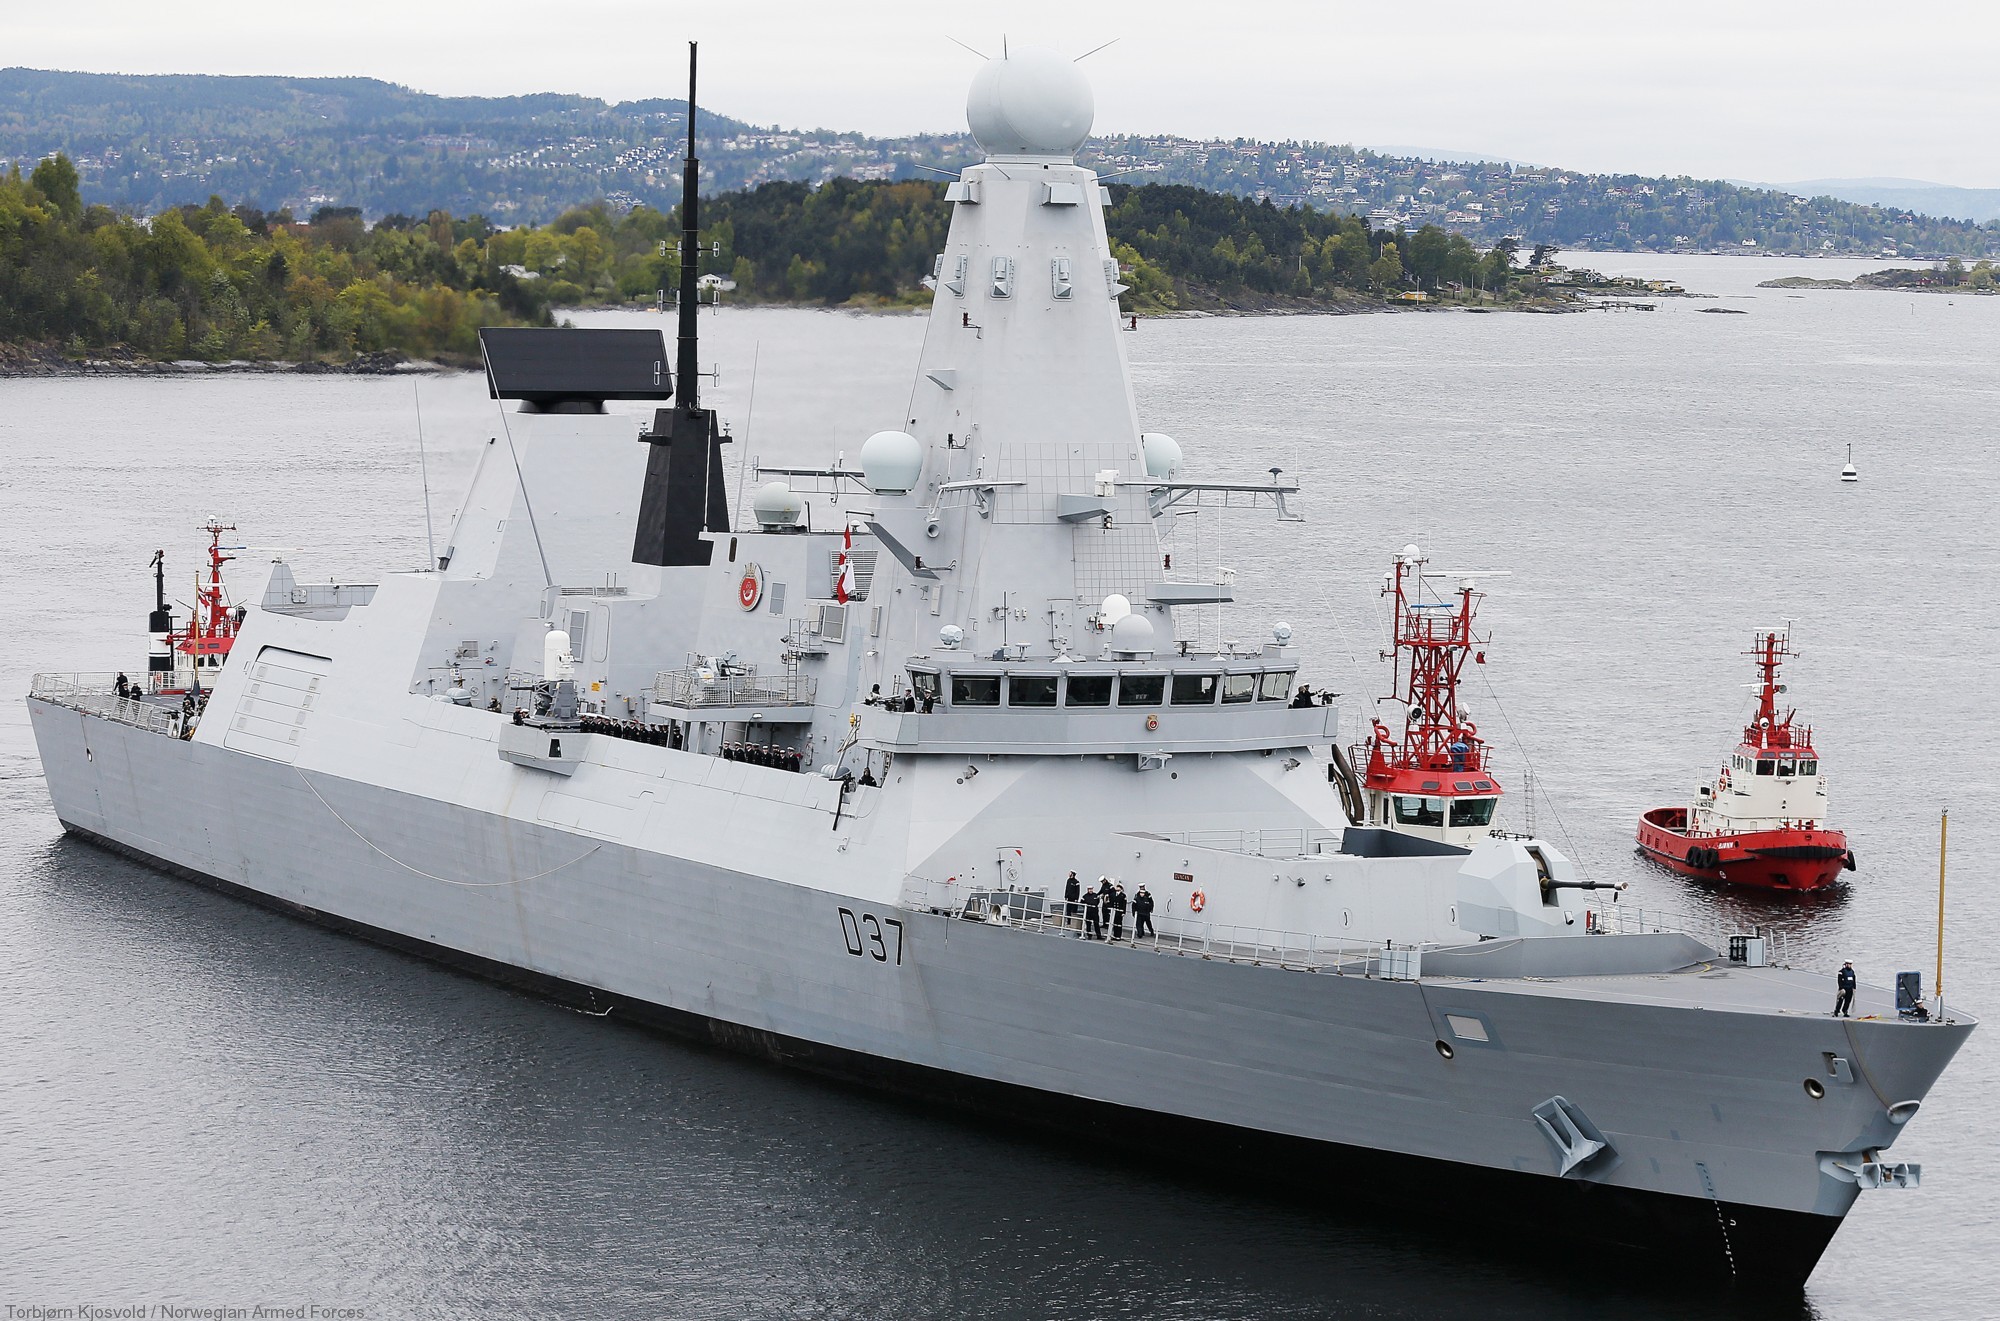 d37 hms duncan d-37 type 45 daring class guided missile destroyer ddg royal navy sea viper 39